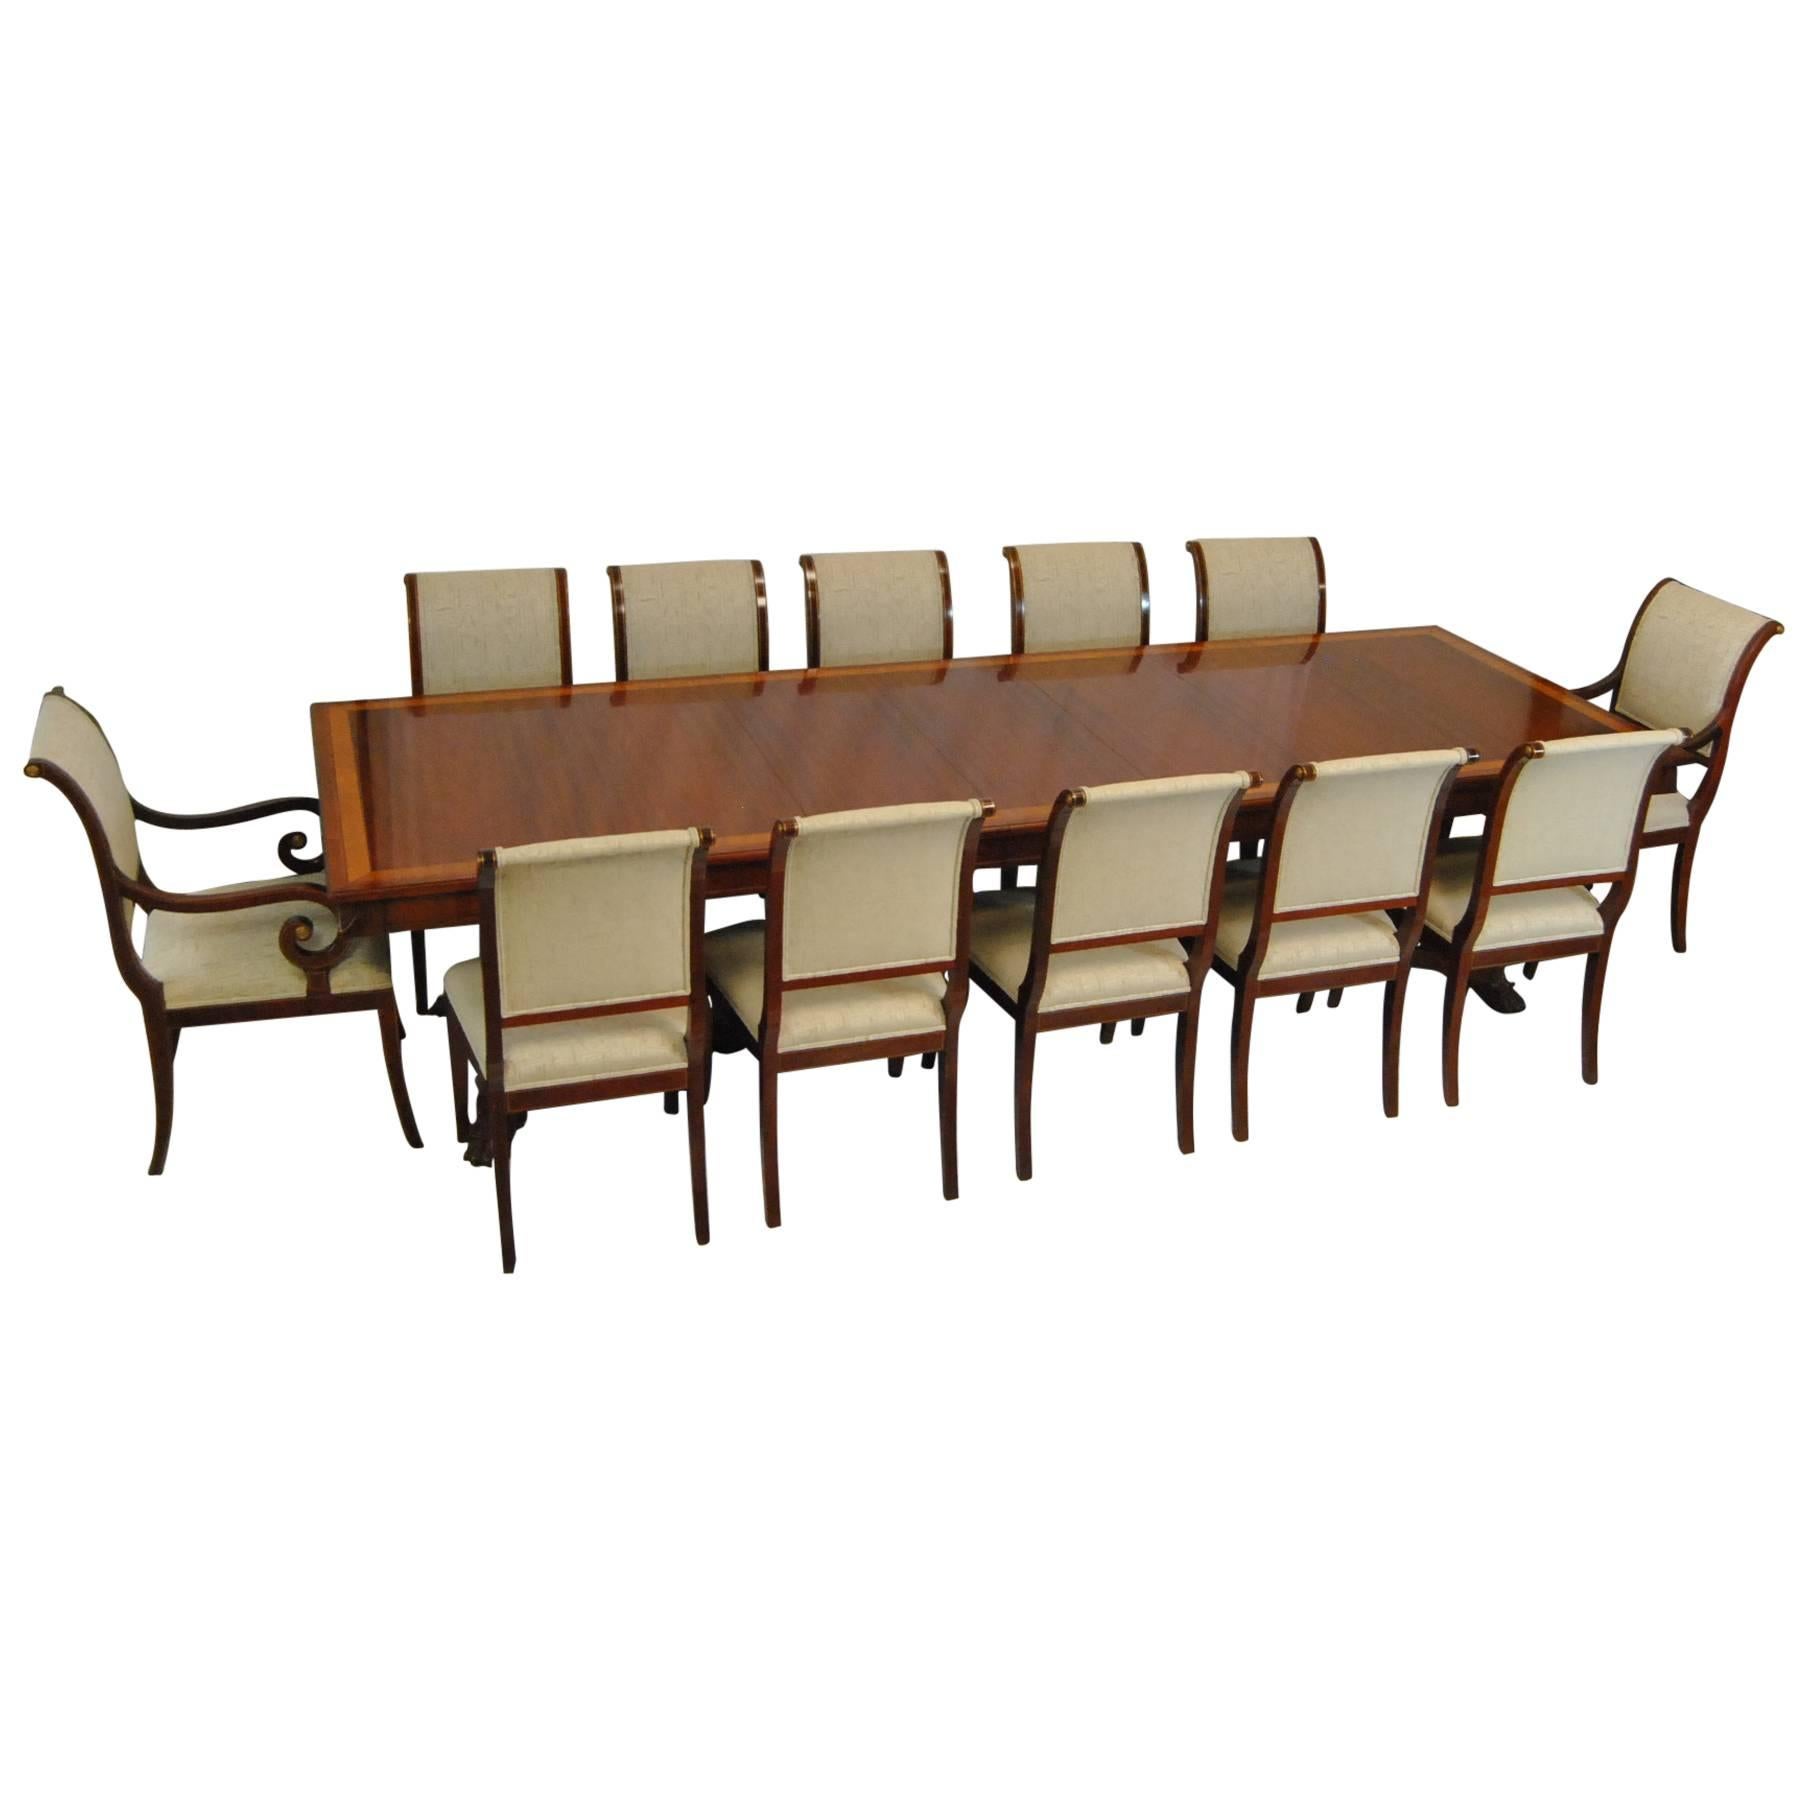 Mahogany Dining Table and 12 Chairs by Kindel, Neoclassic Collection